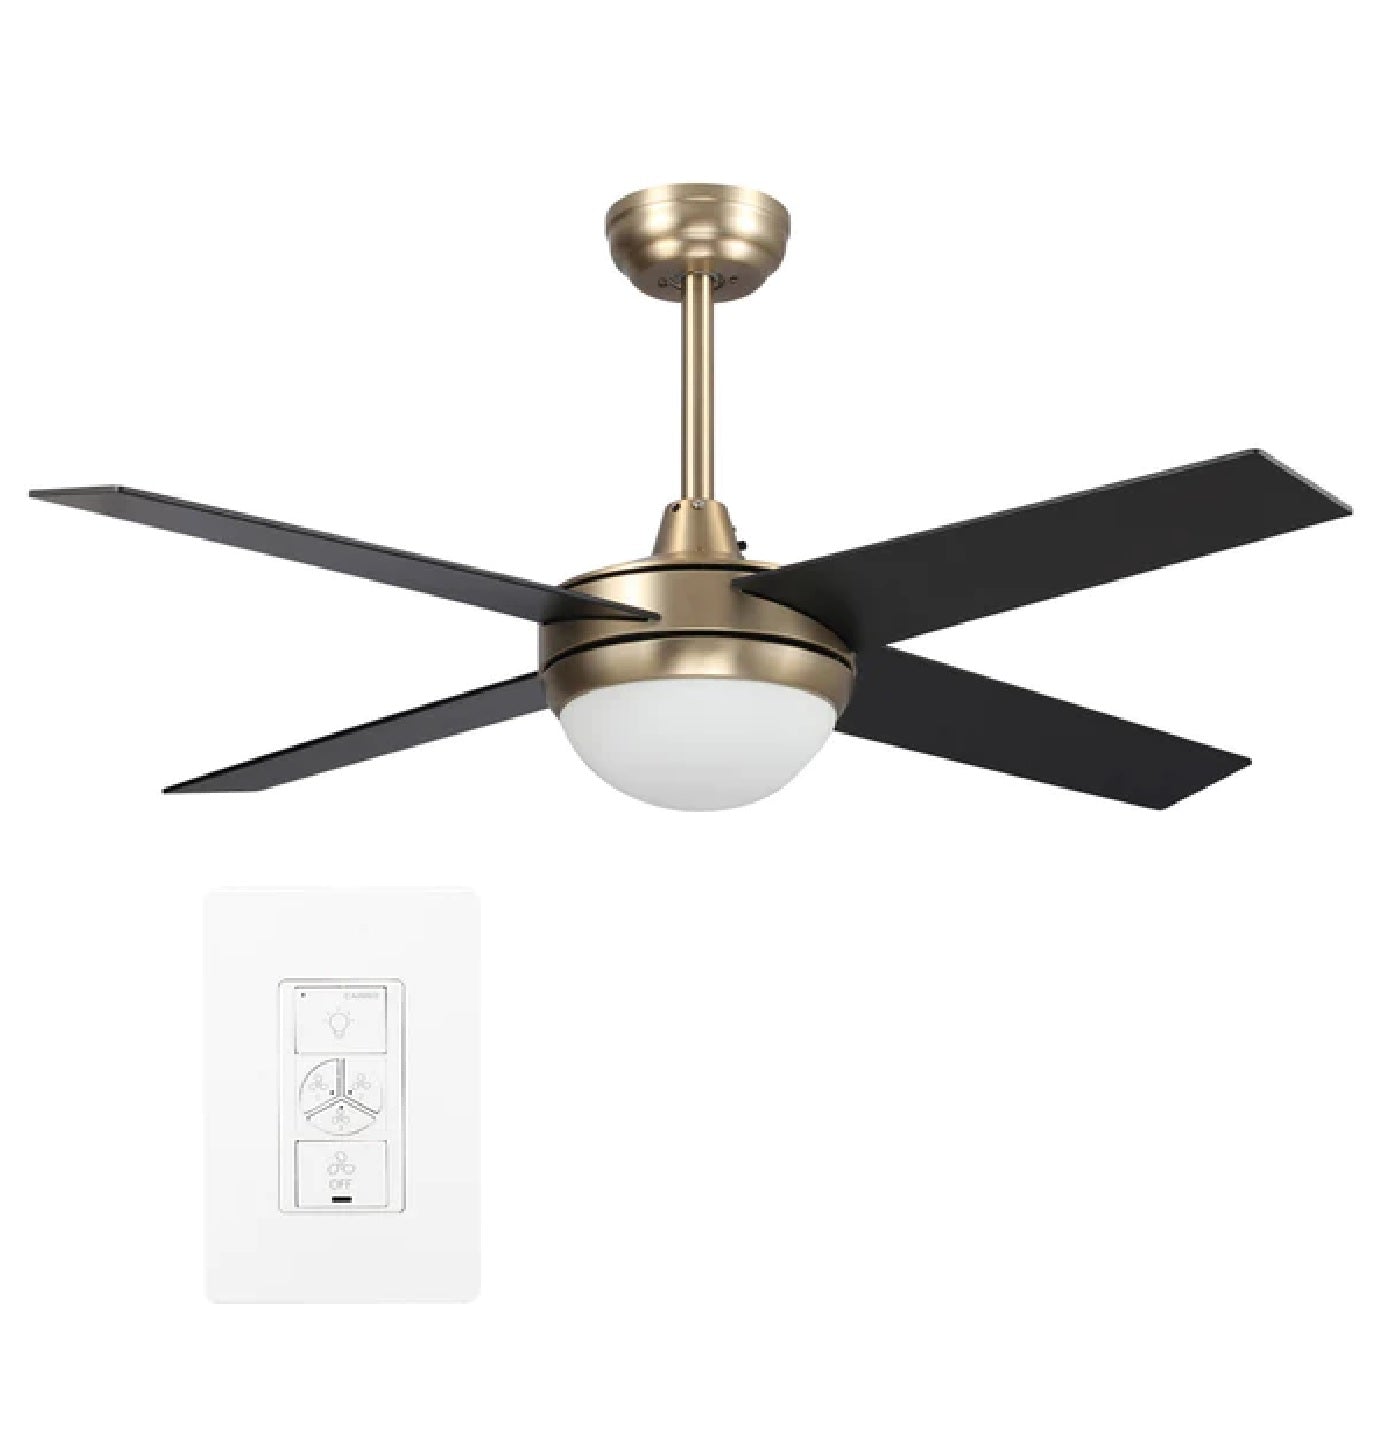 Carro - NEVA 48 inch 4-Blade Smart Ceiling Fan with LED Light Kit & Smart Wall Switch - Gold/Black